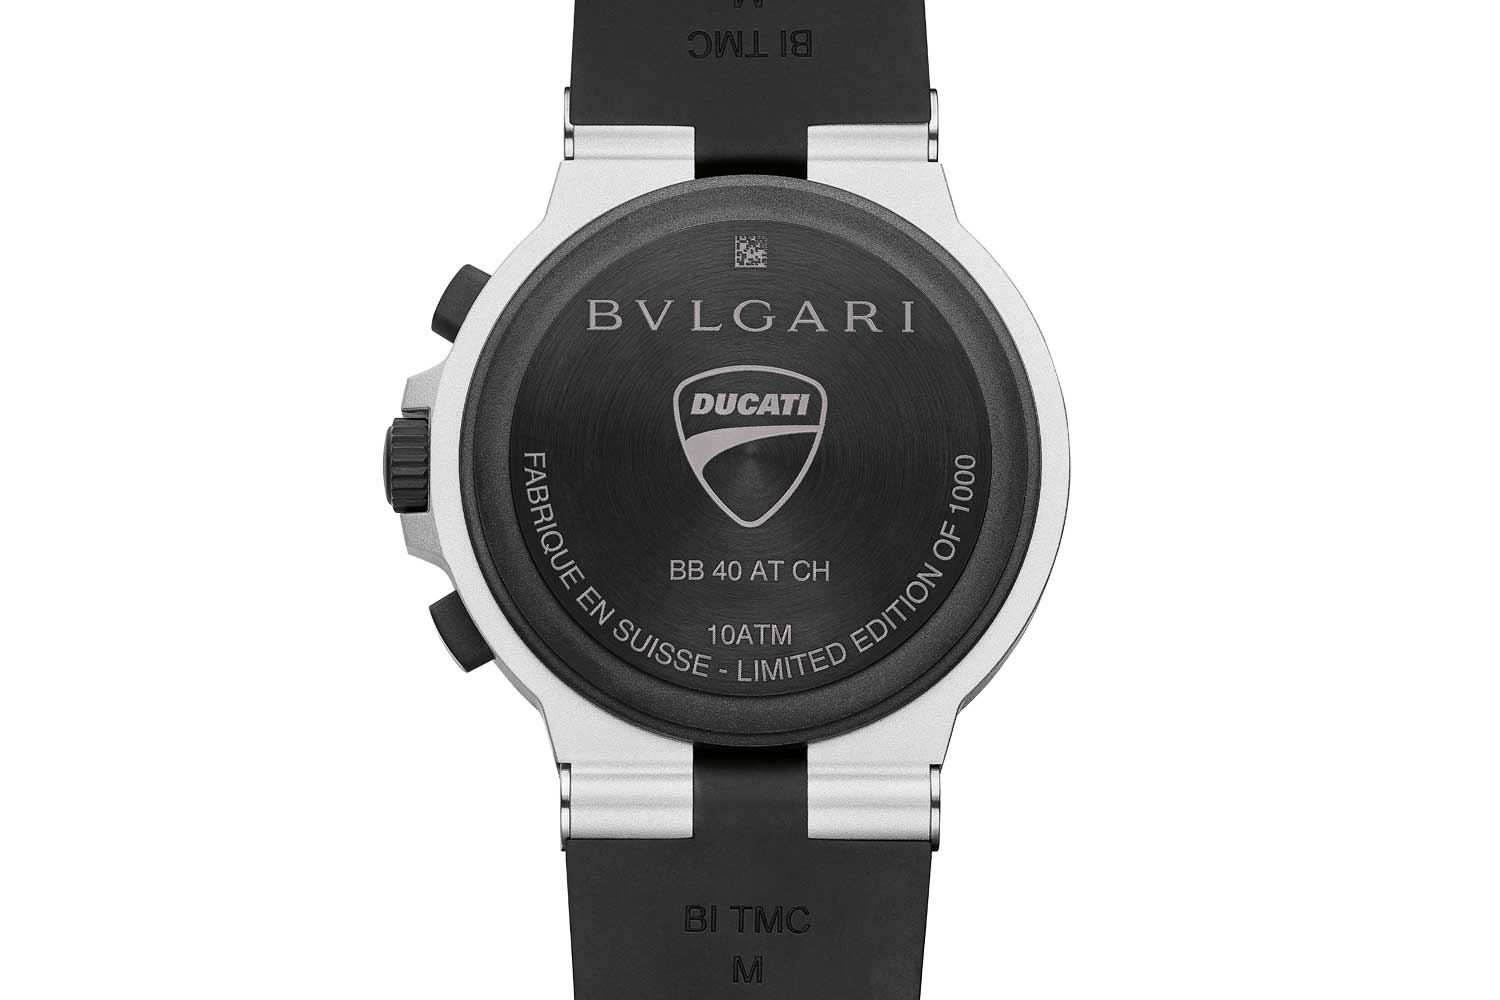 The caseback, in matte black DLC titanium, is etched with the Ducati shield logo